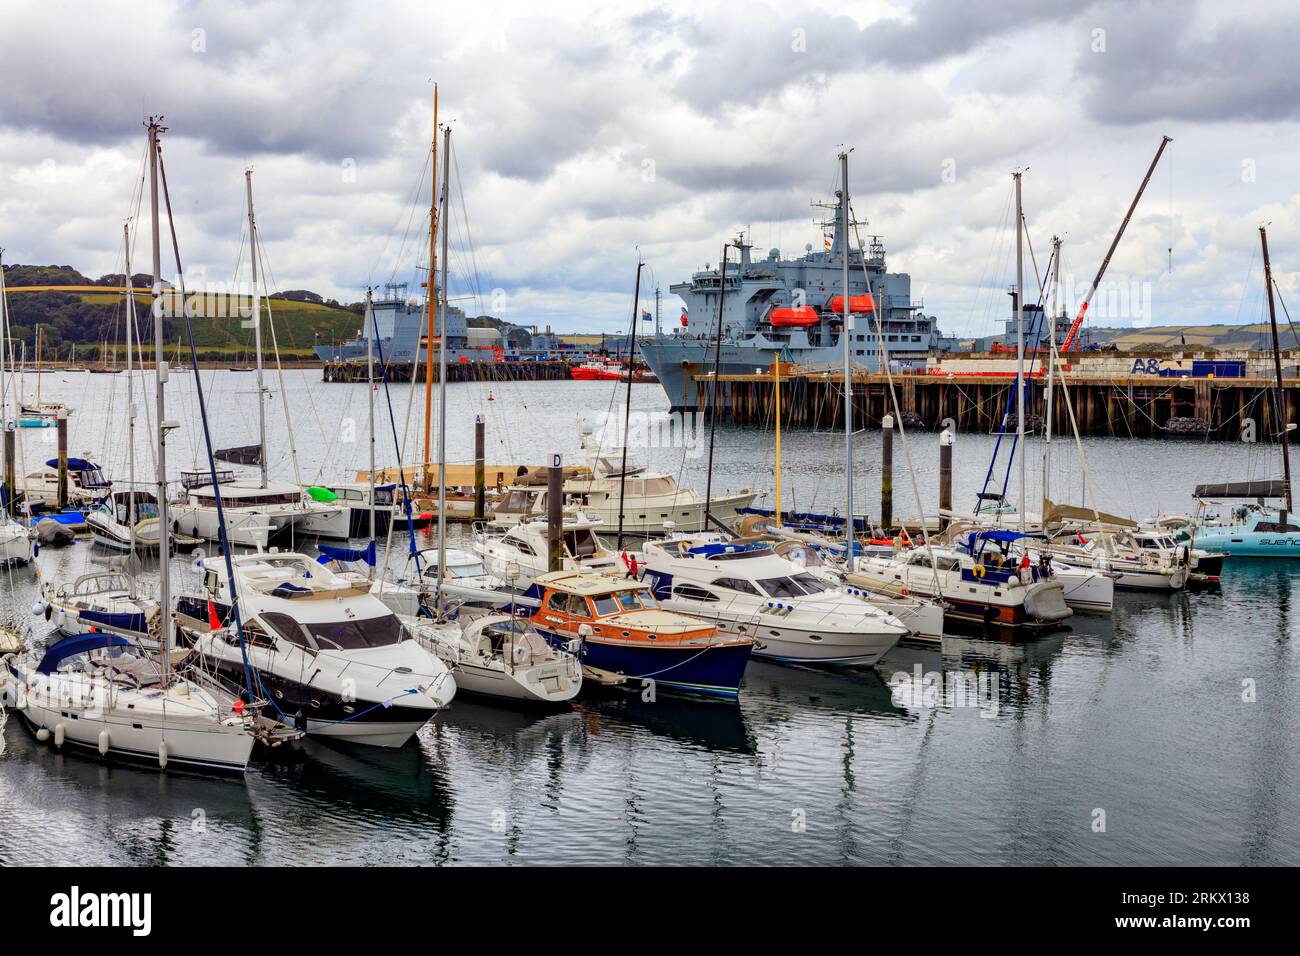 The Naval Dockyard and River Fal pleasure craft pontoons in Falmouth, Cornwall, England, UK Stock Photo